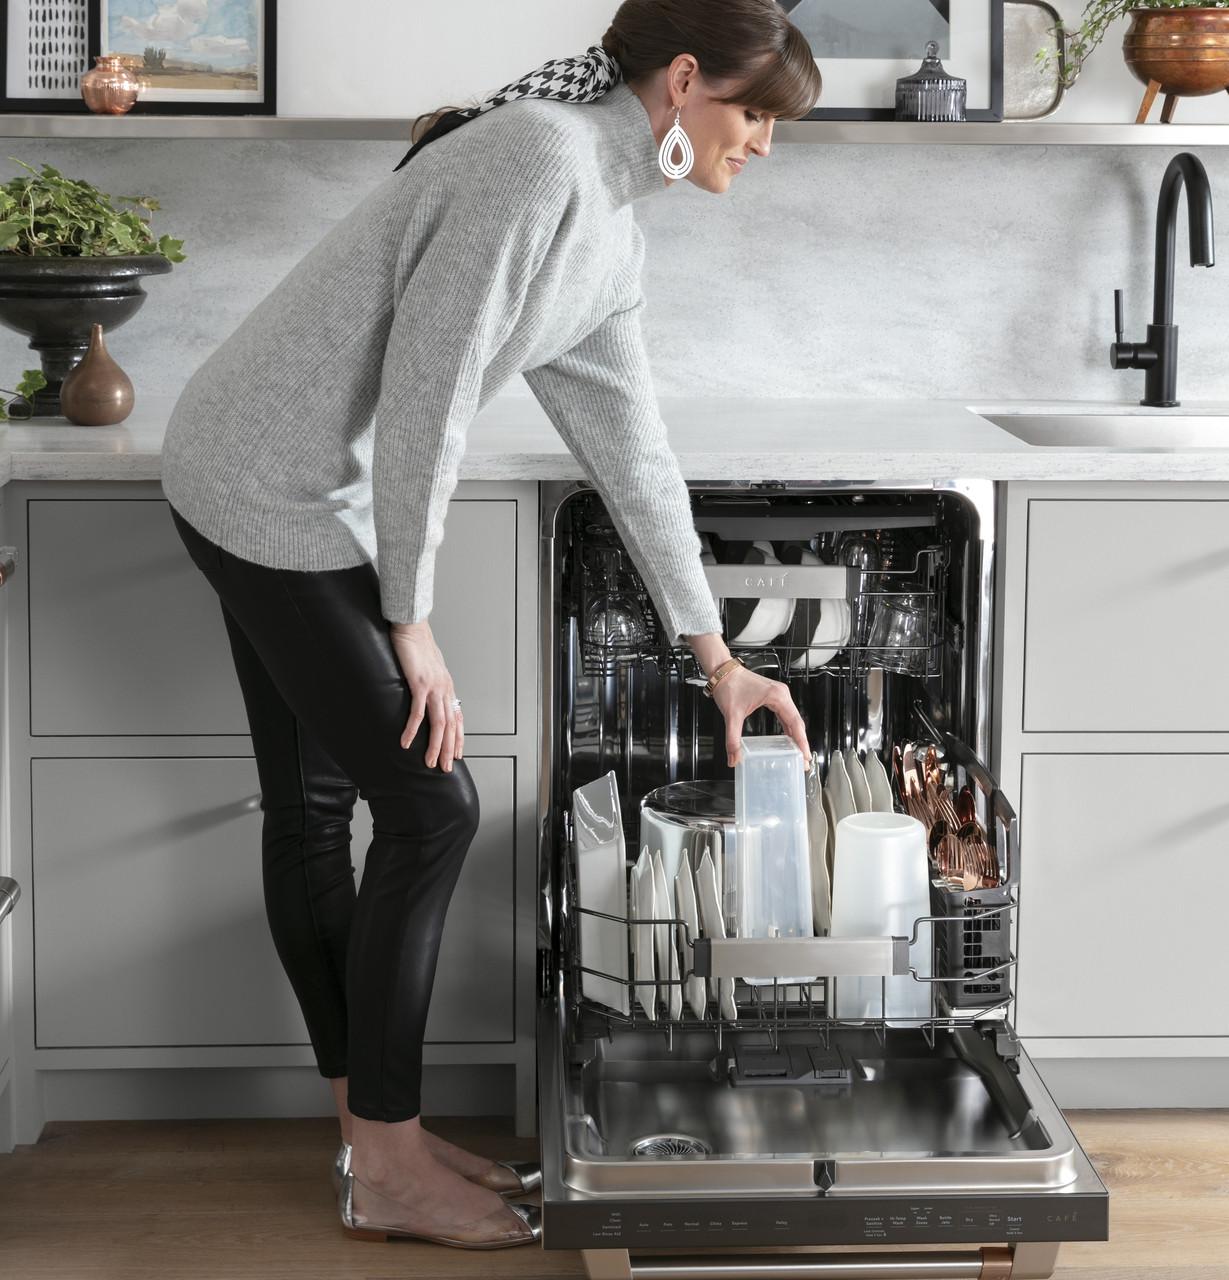 Cafe Caf(eback)™ ENERGY STAR® Stainless Steel Interior Dishwasher with Sanitize and Ultra Wash